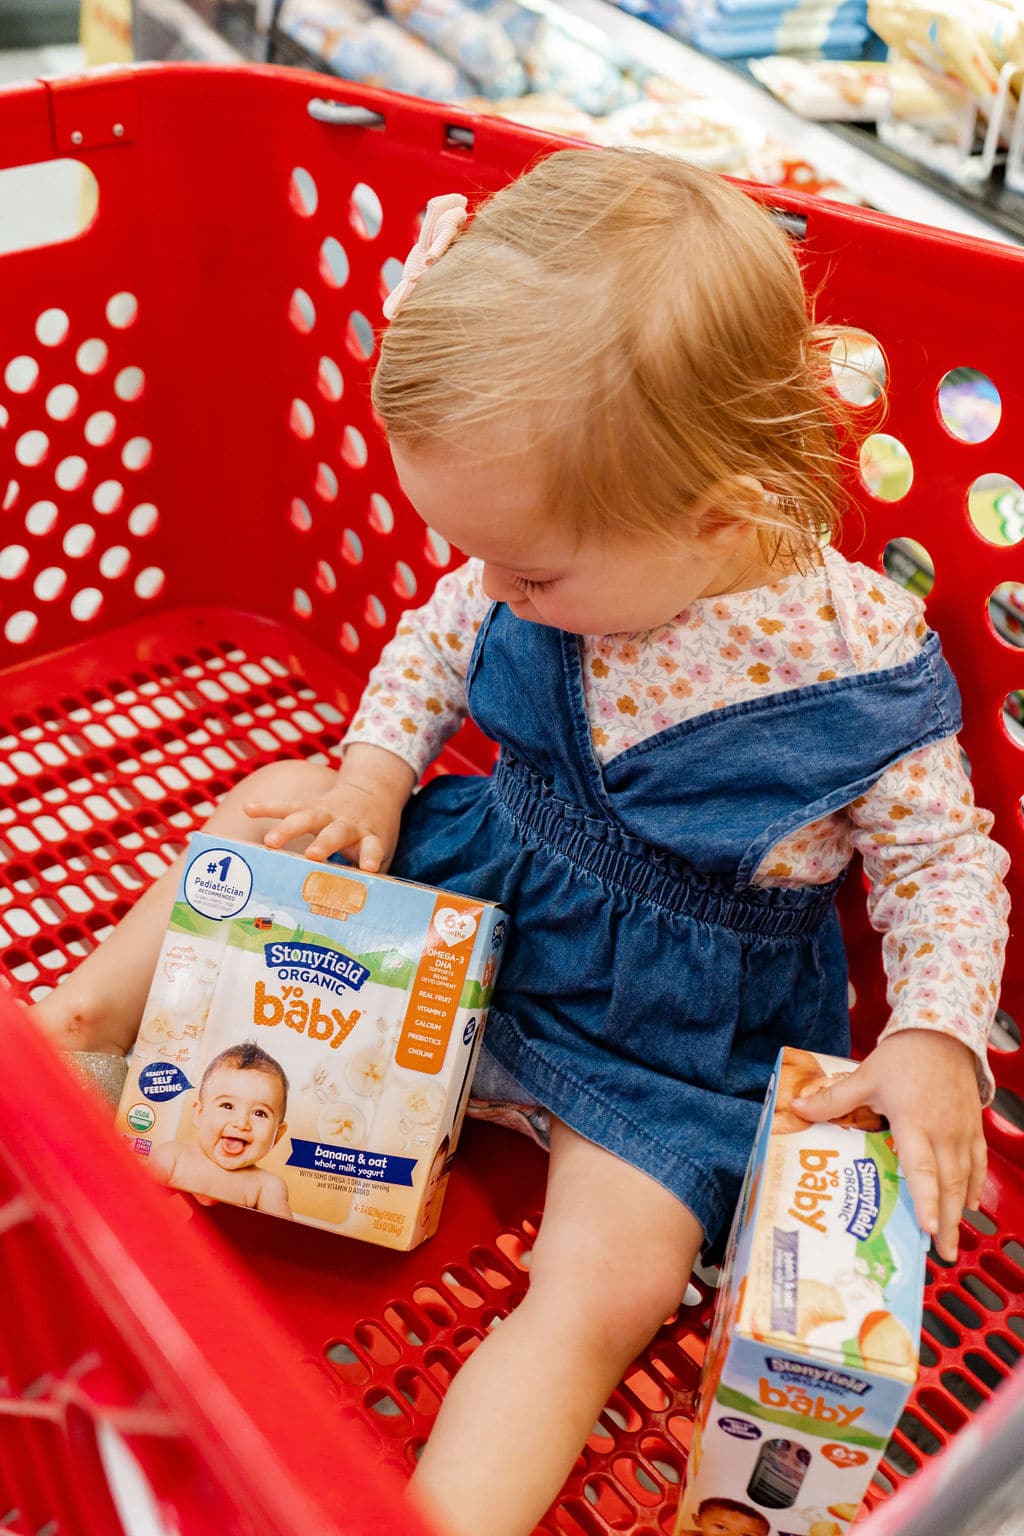 Little girl sitting inside a Target shopping cart looking at a box of Stonyfield Yobaby yogurt.